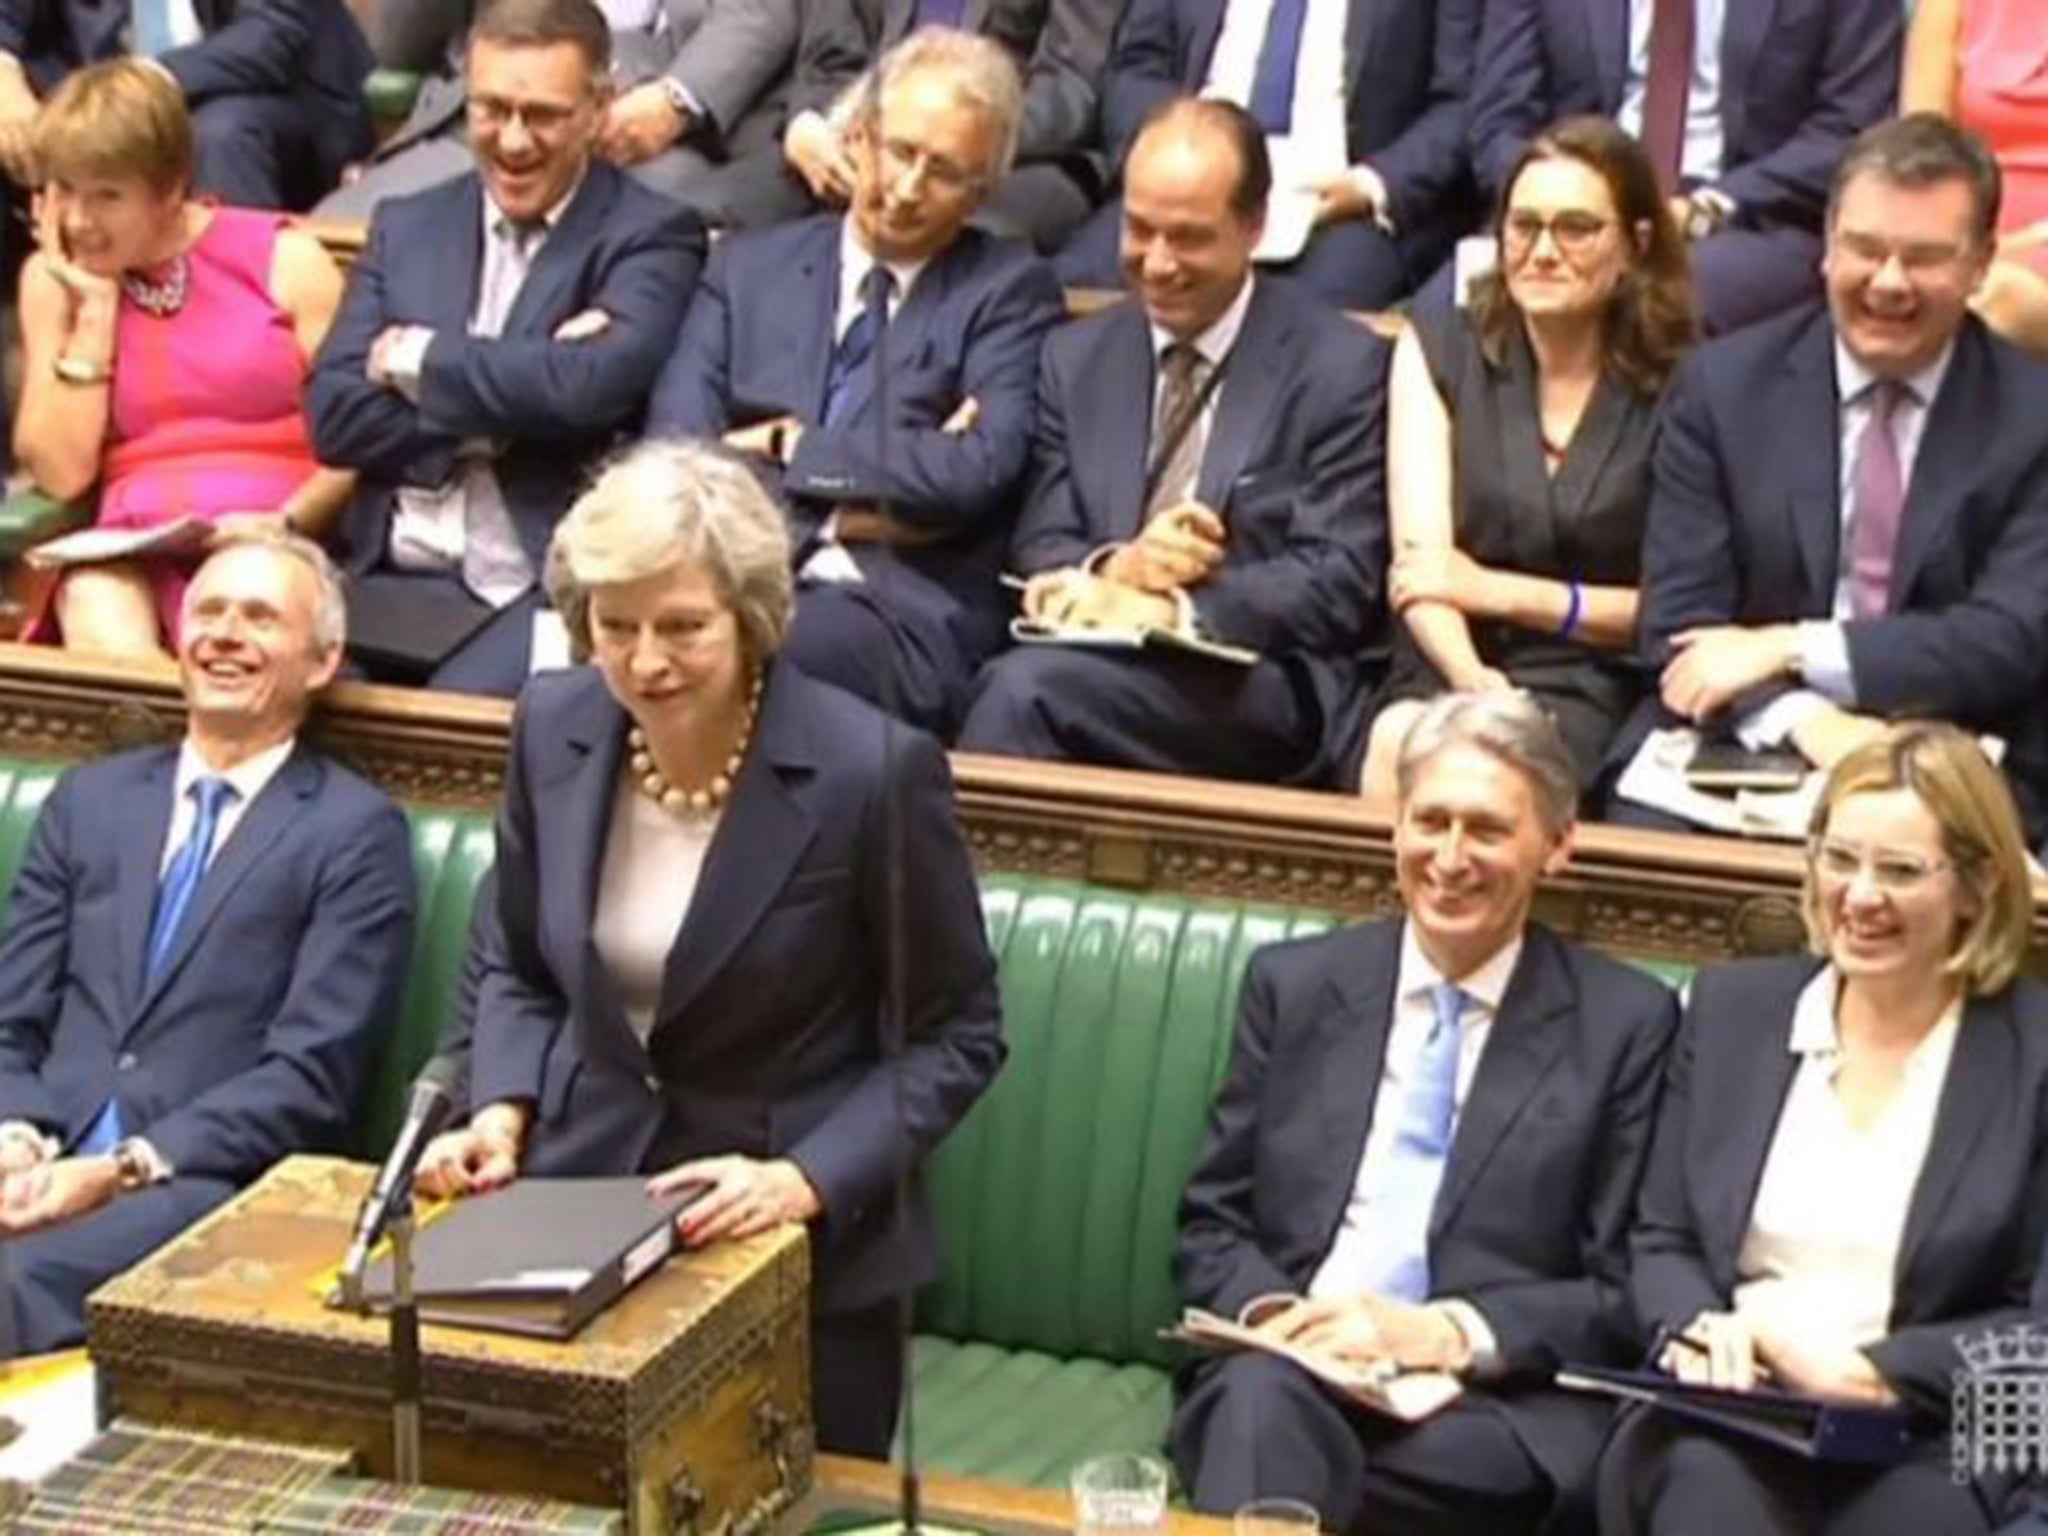 Theresa May said in her first PMQs that she wants to get immigration down to the ‘tens of thousands’